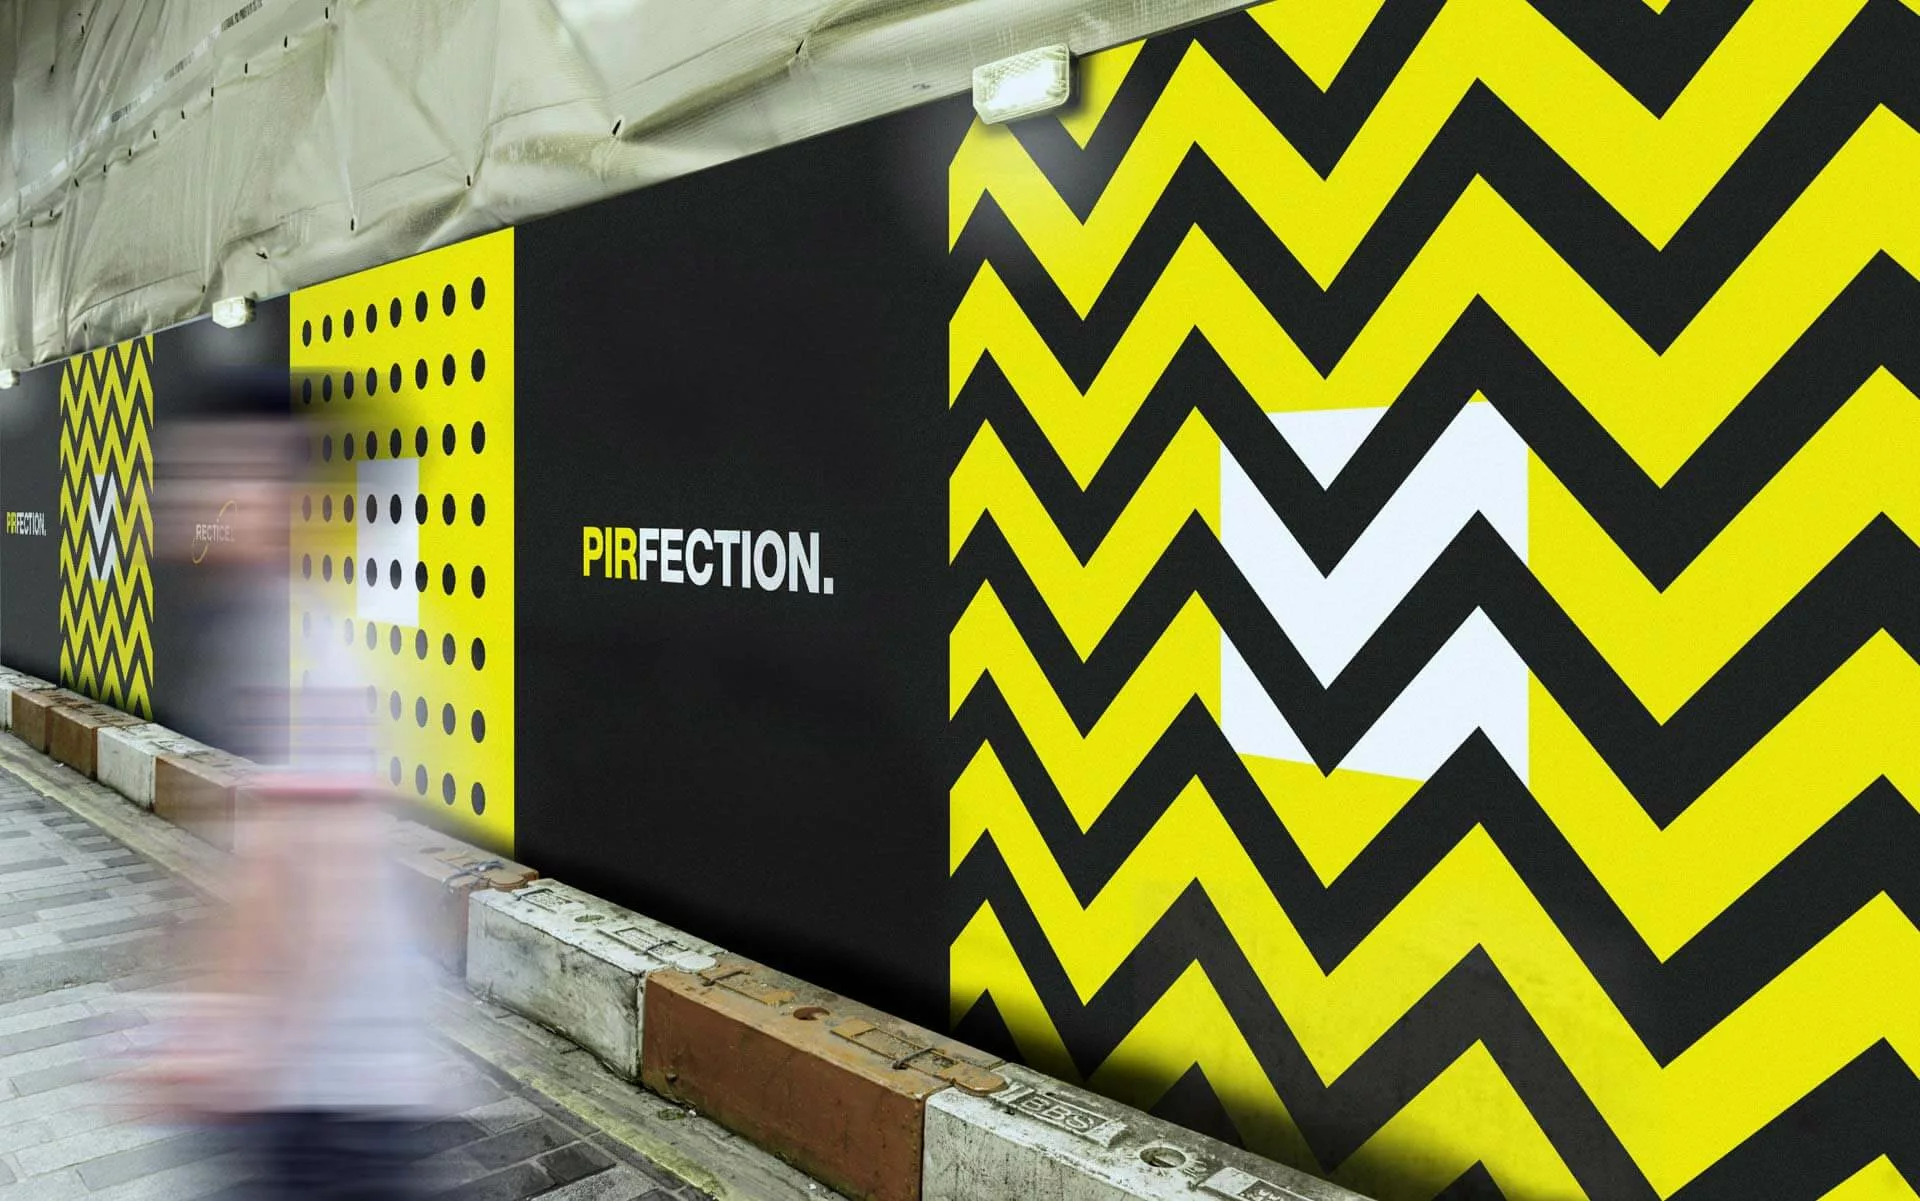 A large recticel graphic covering an entire wall in a high traffic area